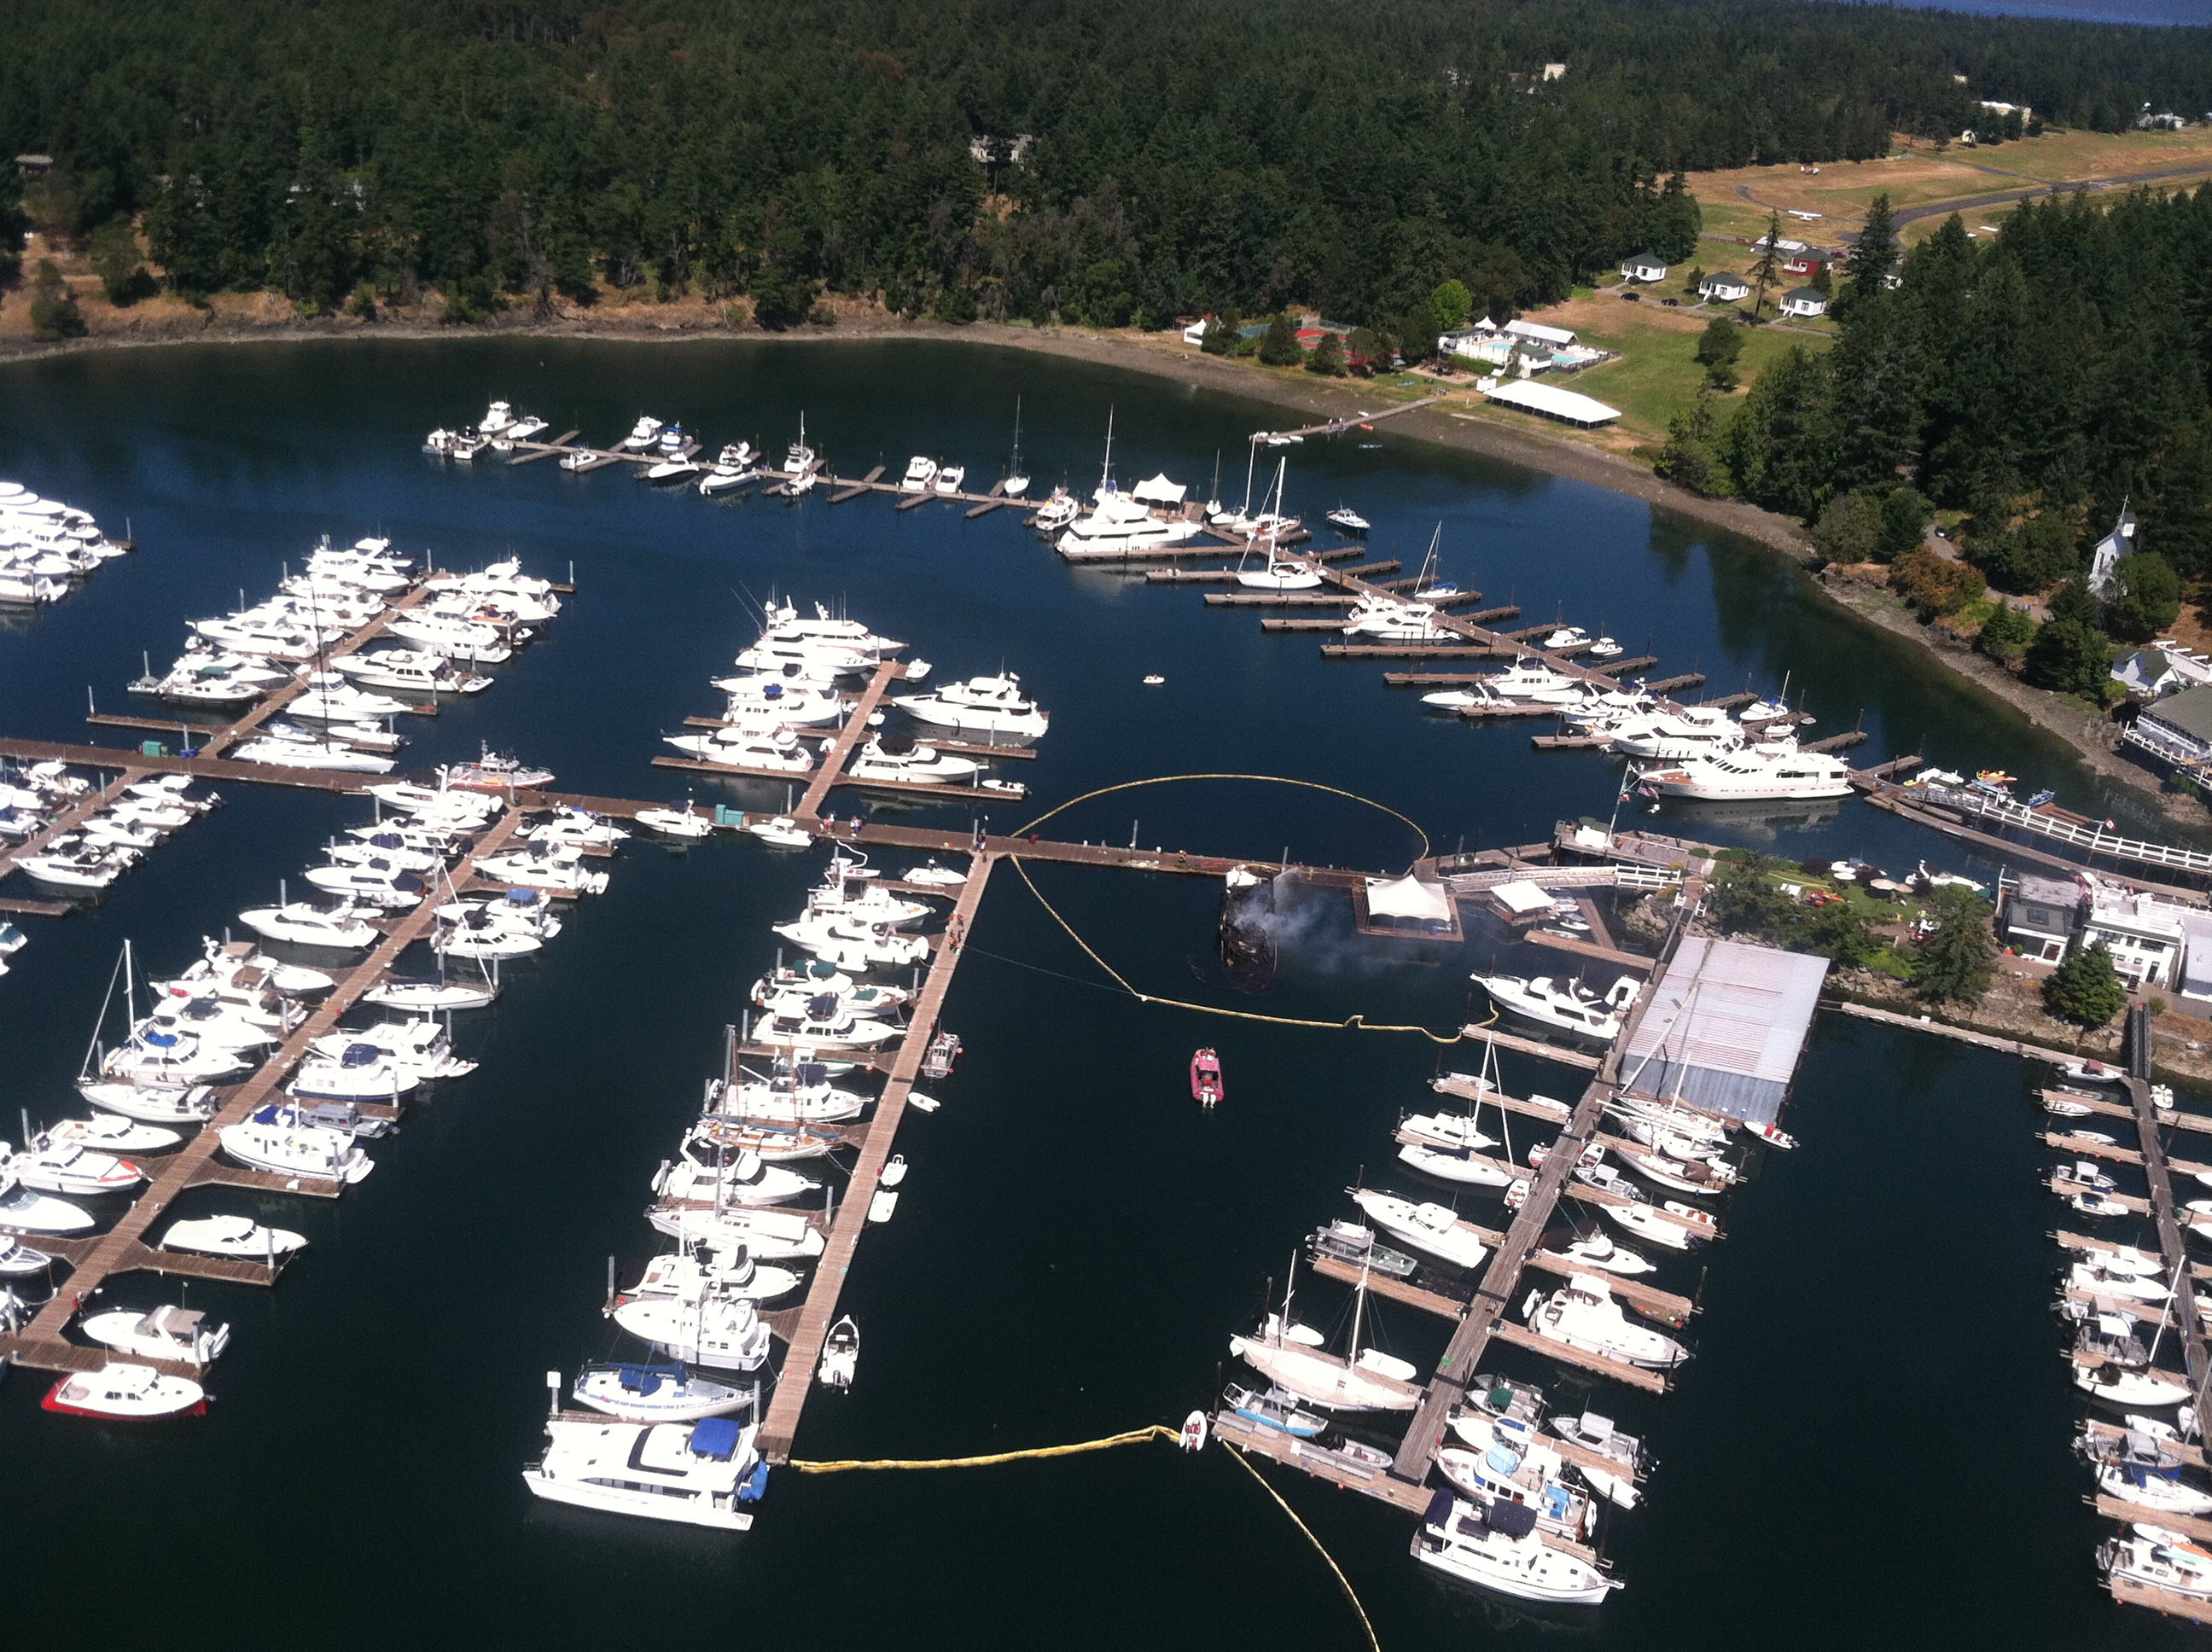 Ariel view of the Roche Harbor boat fire incident